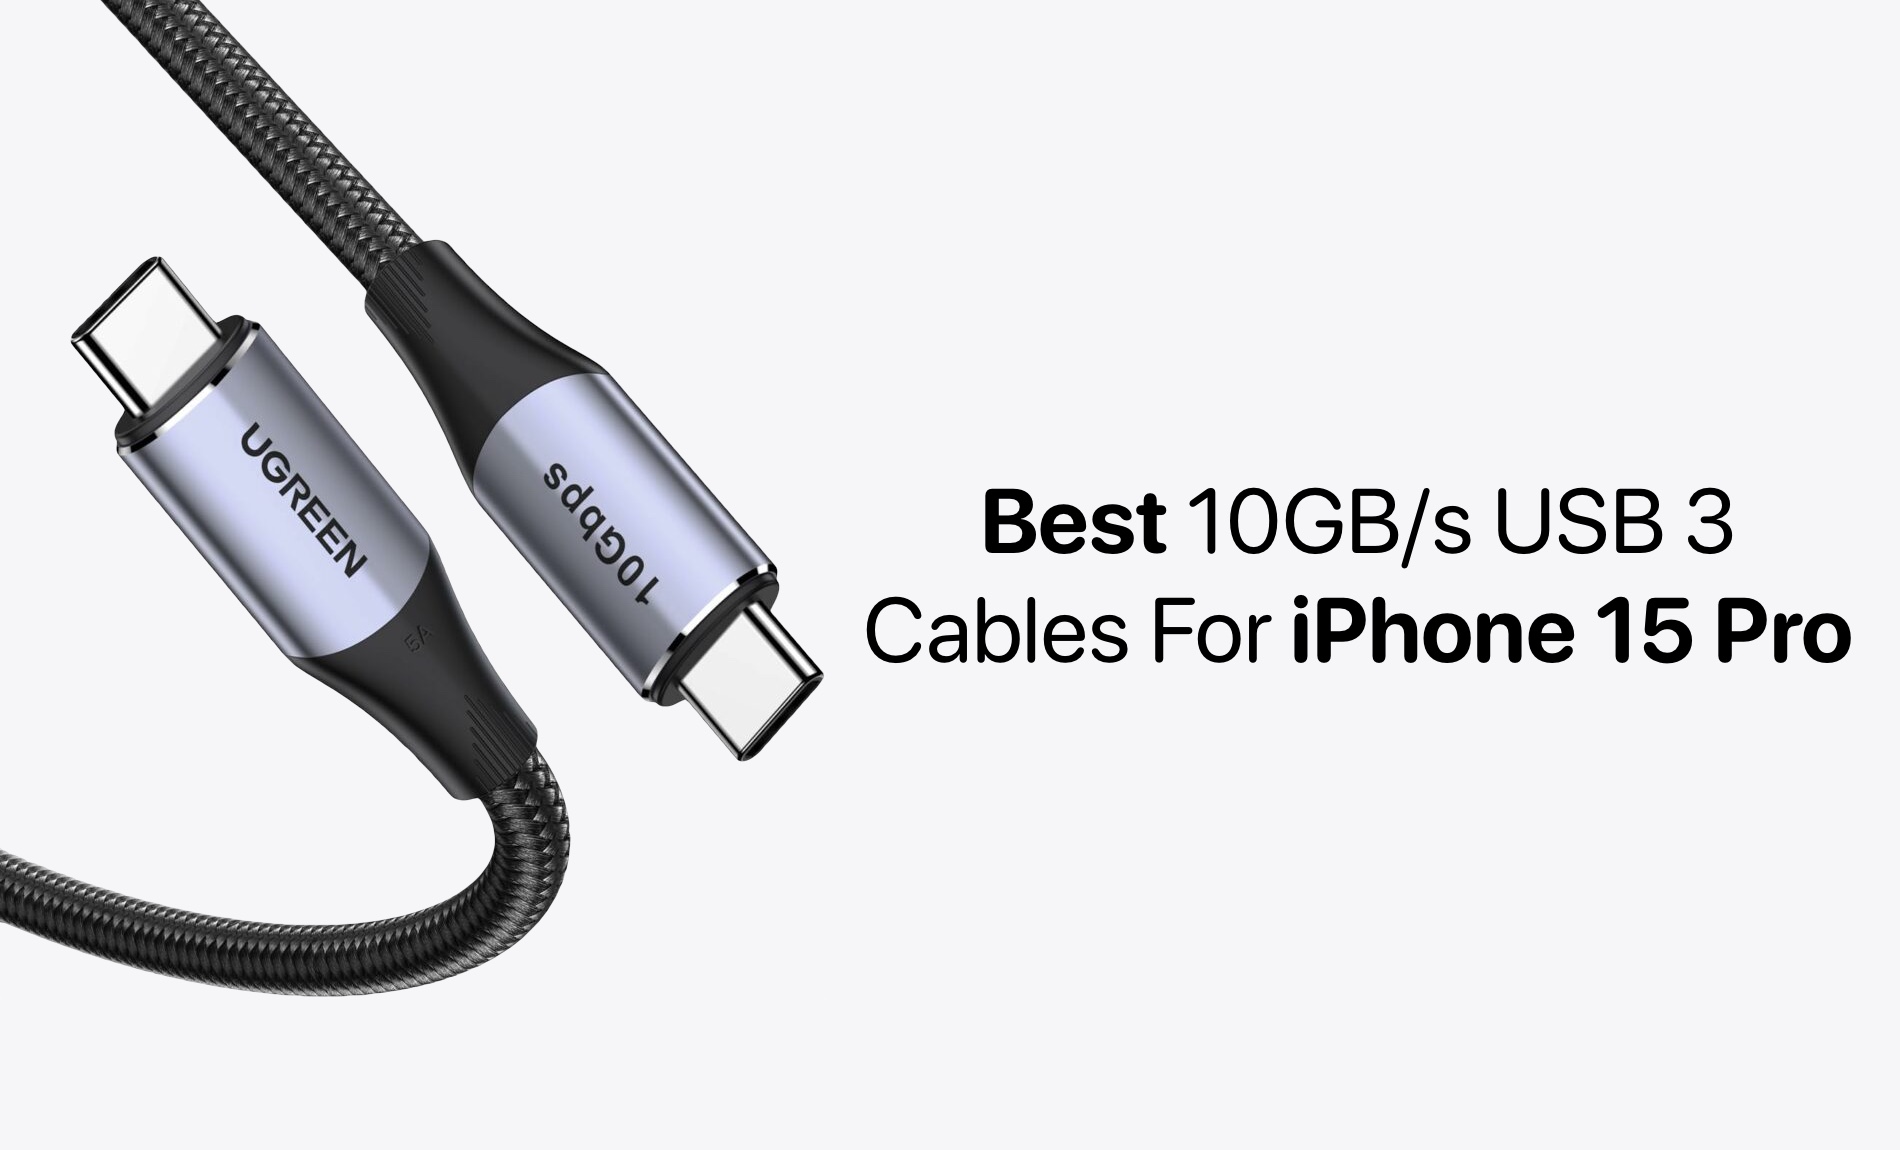 Best USB-C With USB 3 Cables For iPhone 15 Pro That Offer 10GB/s